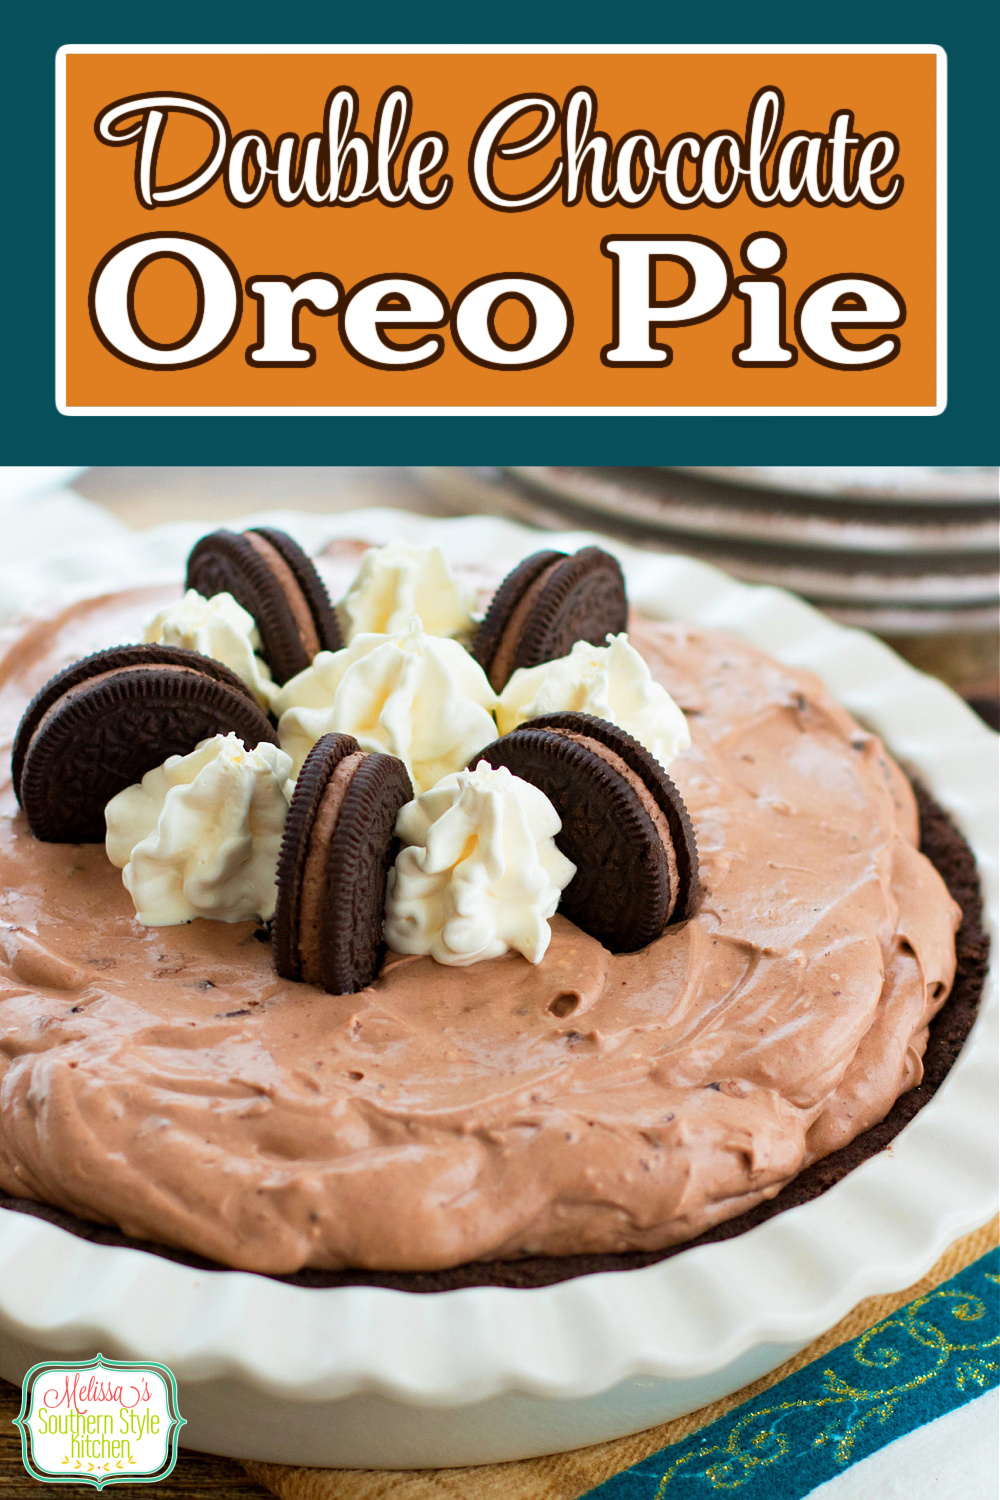 This creamy Double Chocolate Oreo Pie requires no cooking at all #doublechocolatepie #oreopie #nobakepierecipes #chocolate #desserts #dessertfoodrecipes #southernreipes #southernfood #Oreos #chocolatepie via @melissasssk